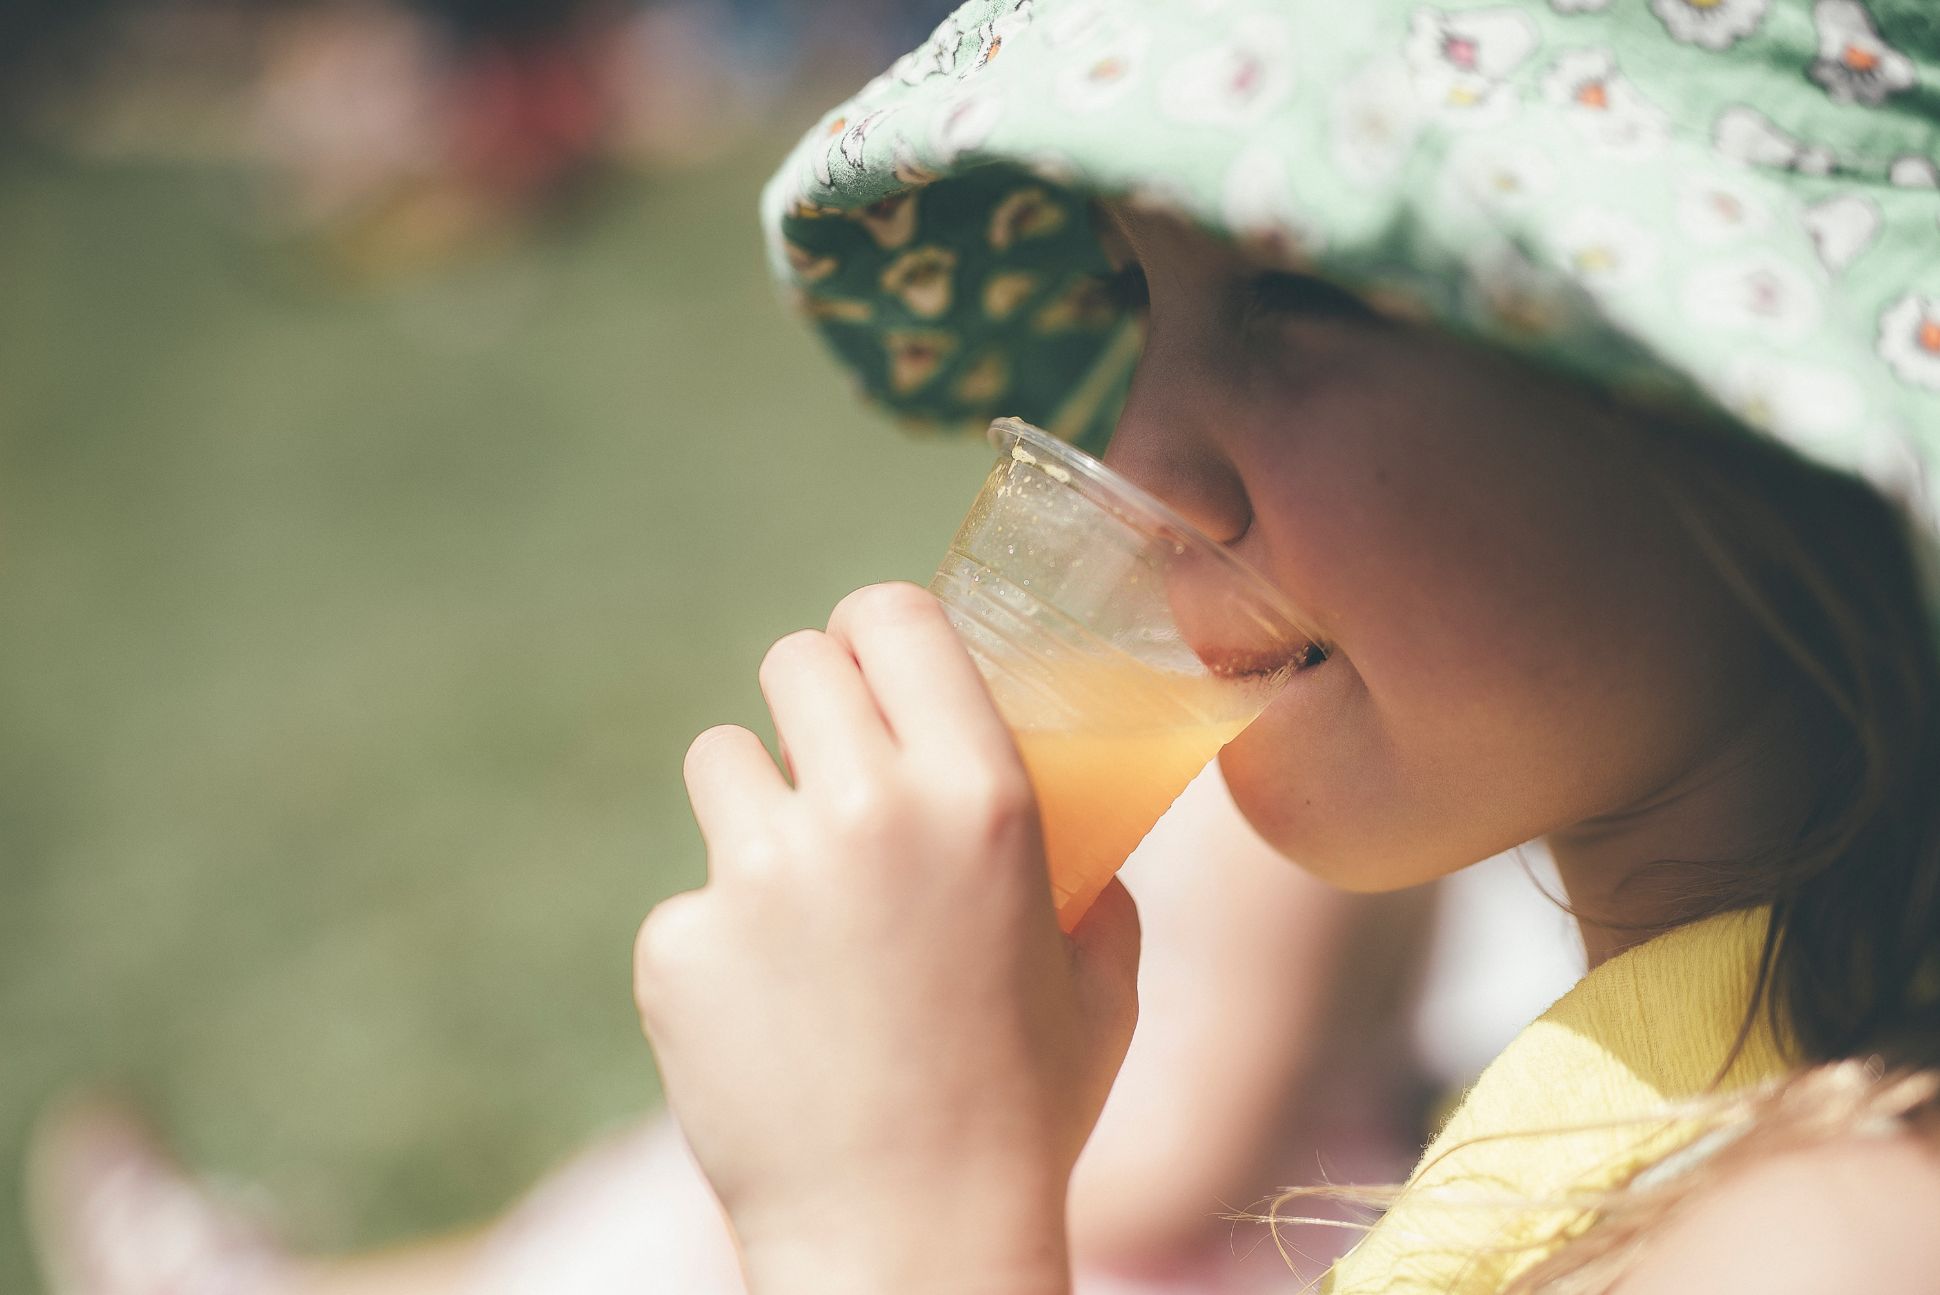 Young girl drinking orange juice from plastic cup